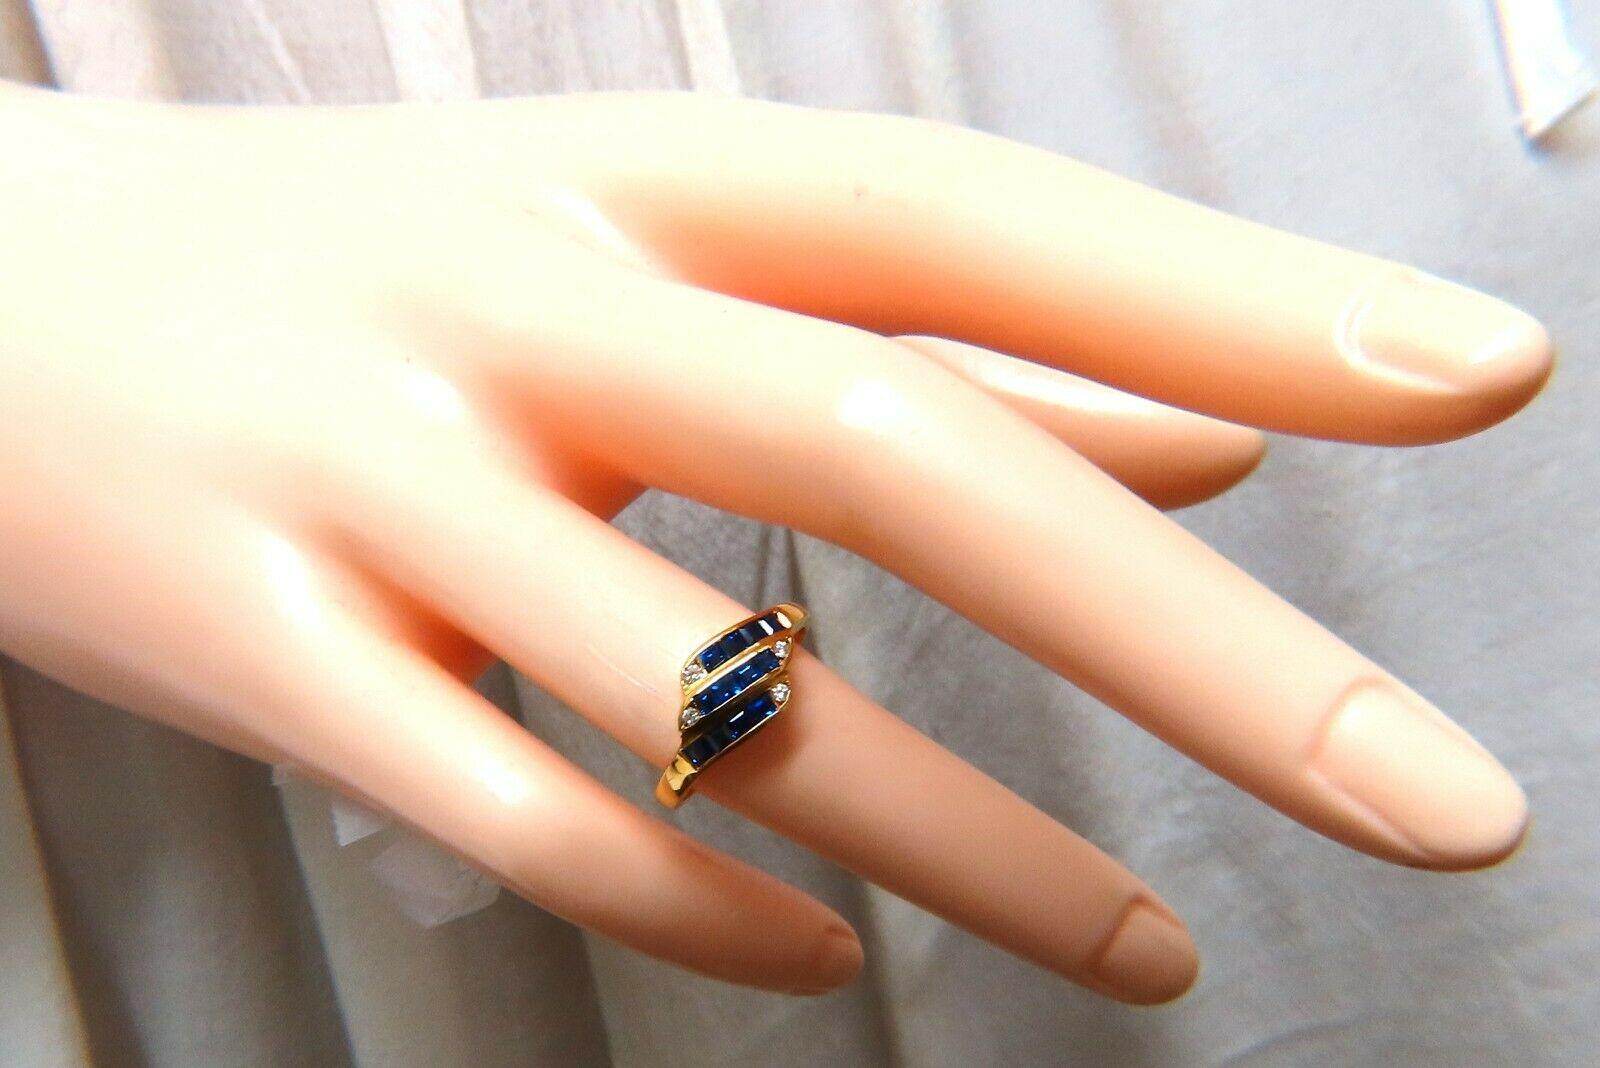 Sapphire & Diamonds Accent Ring

.50ct Royal Blue & transparent

Full cut and Full Faceted.

Baguette, Full Cut Brilliant

.08ct Natural Round Diamonds

H-color Vs-2 Clarity

2.9 grams 

Ring is 8.3mm wide.

Depth: 2.8mm

current ring size:  6

&